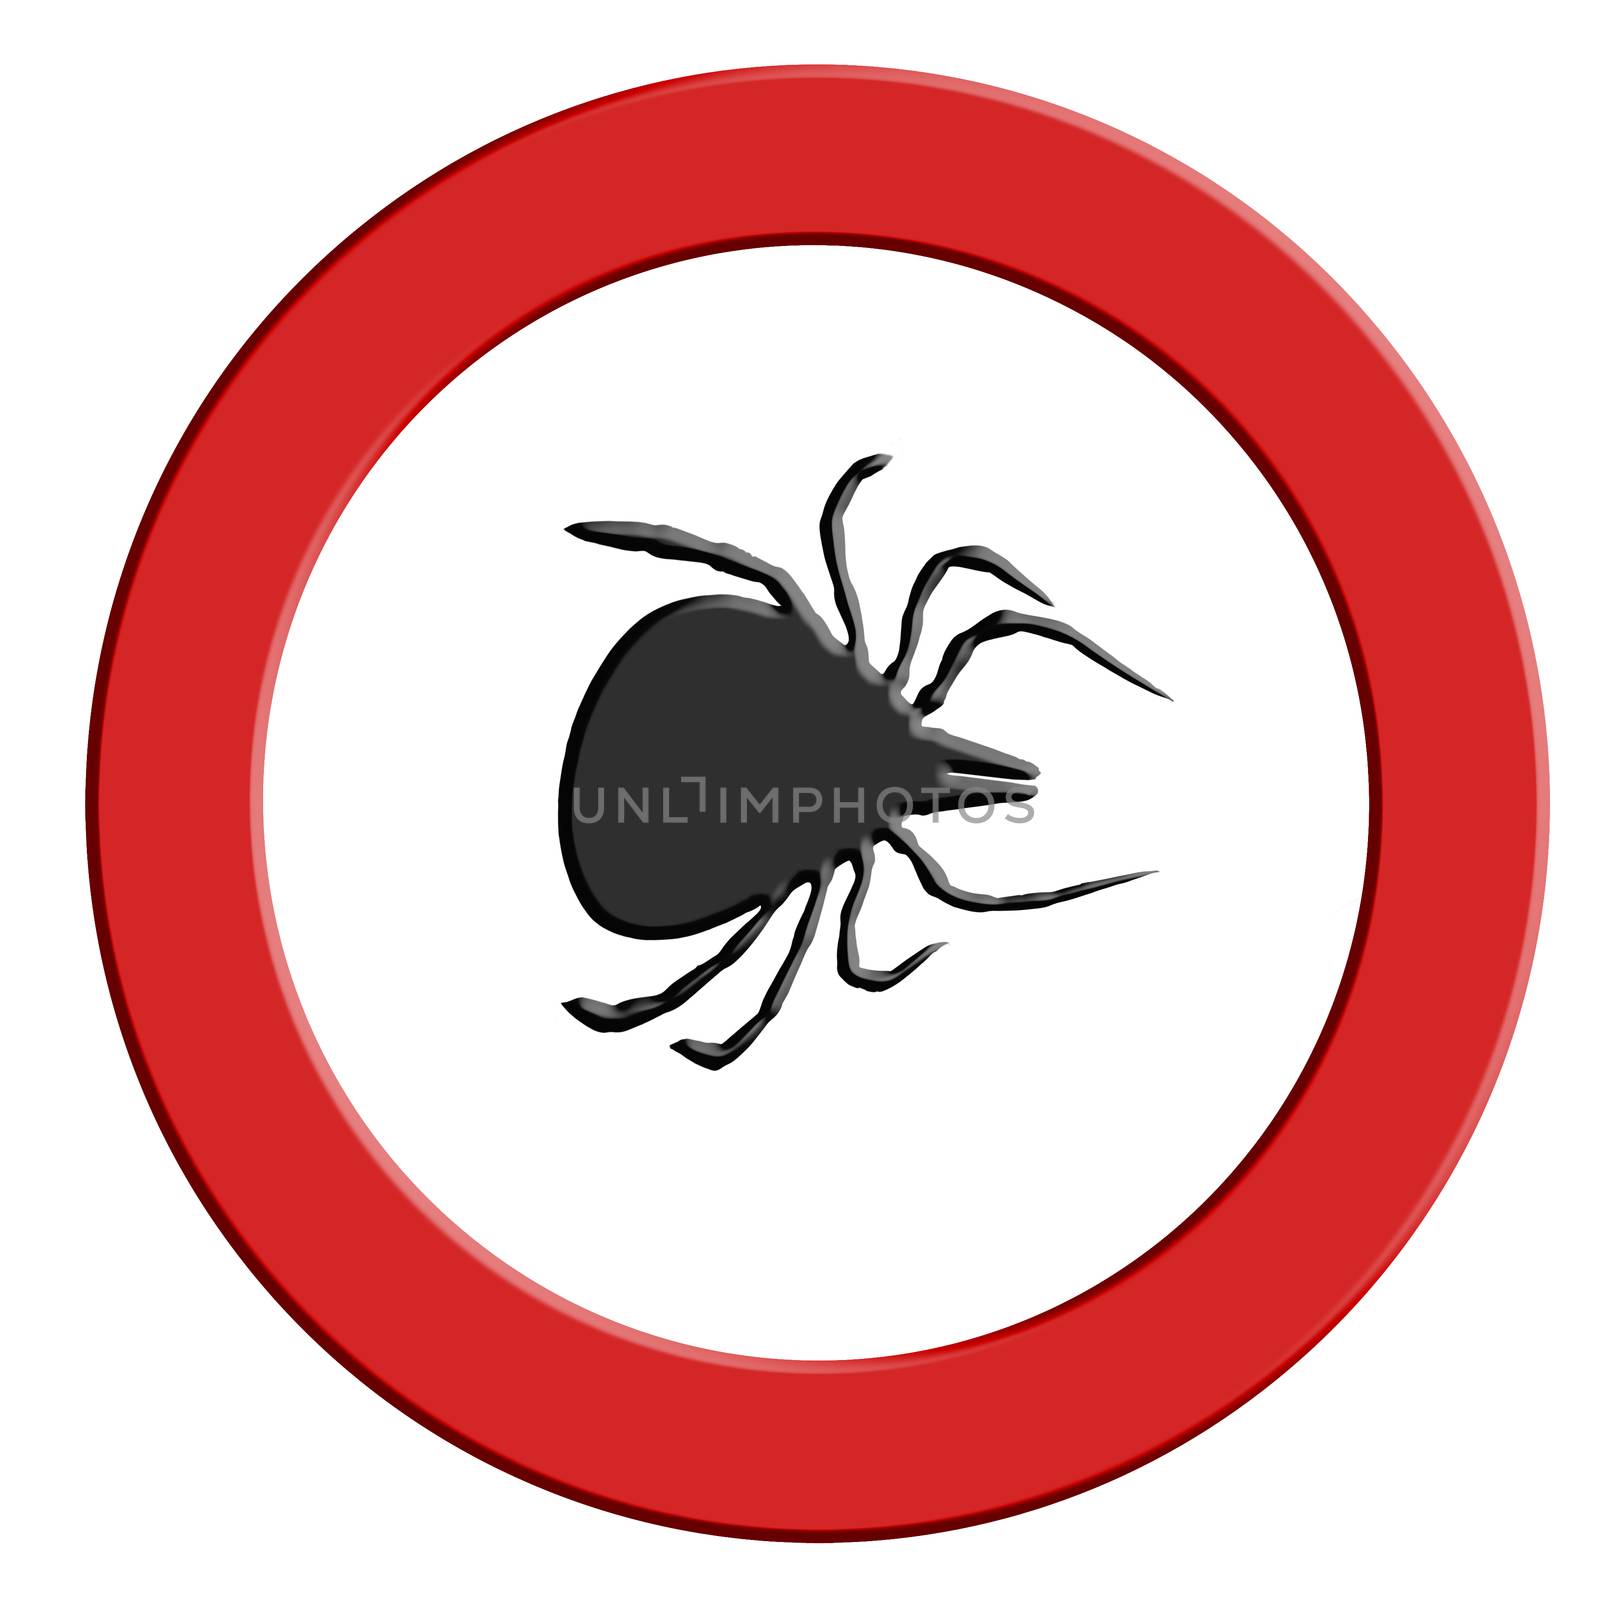 Borreliose and tick warning, round red warning sign with tick symbol.